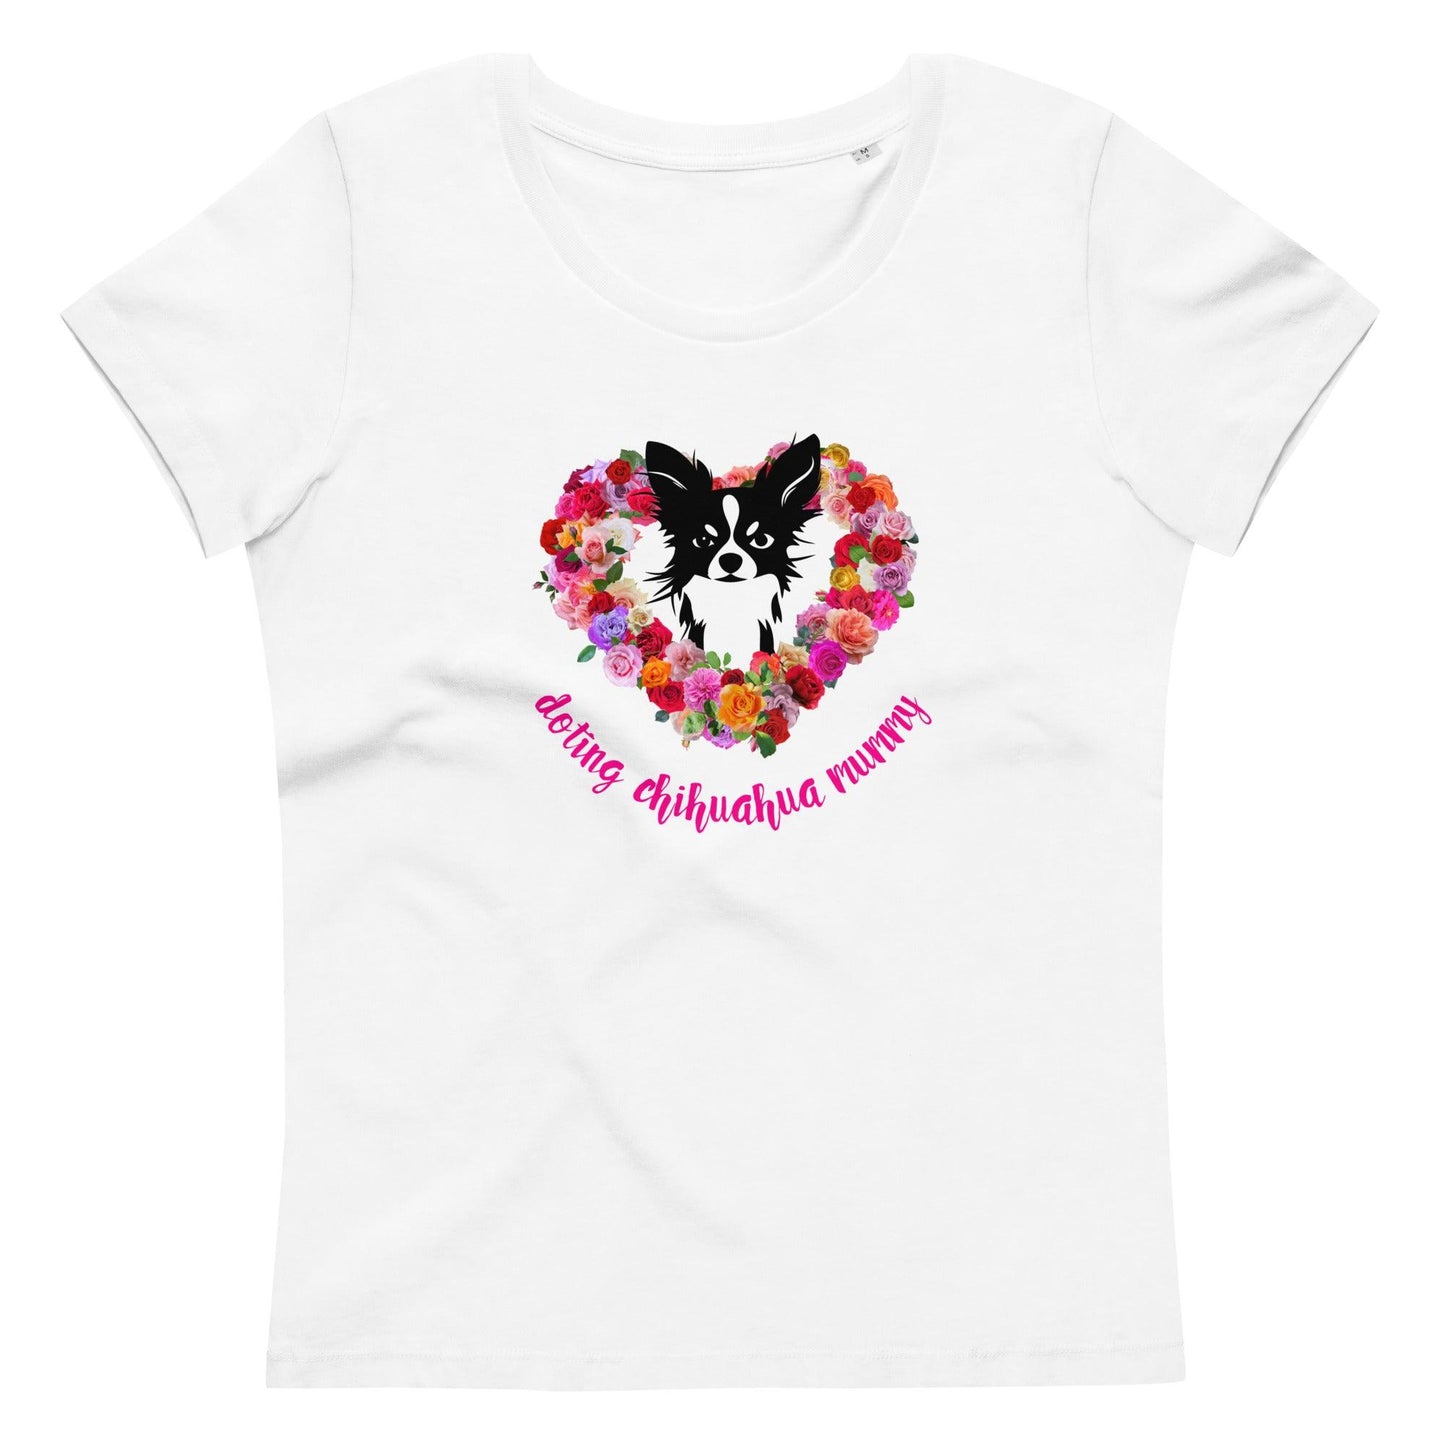 White 100% organic cotton women's fitted t-shirt. Chihuahua and a love heart of roses with the words "doting chihuahua mummy". S-2XL. Romantic, cute and perfect for Mother's Day. Design by Renate Kriegler for Chimigos.